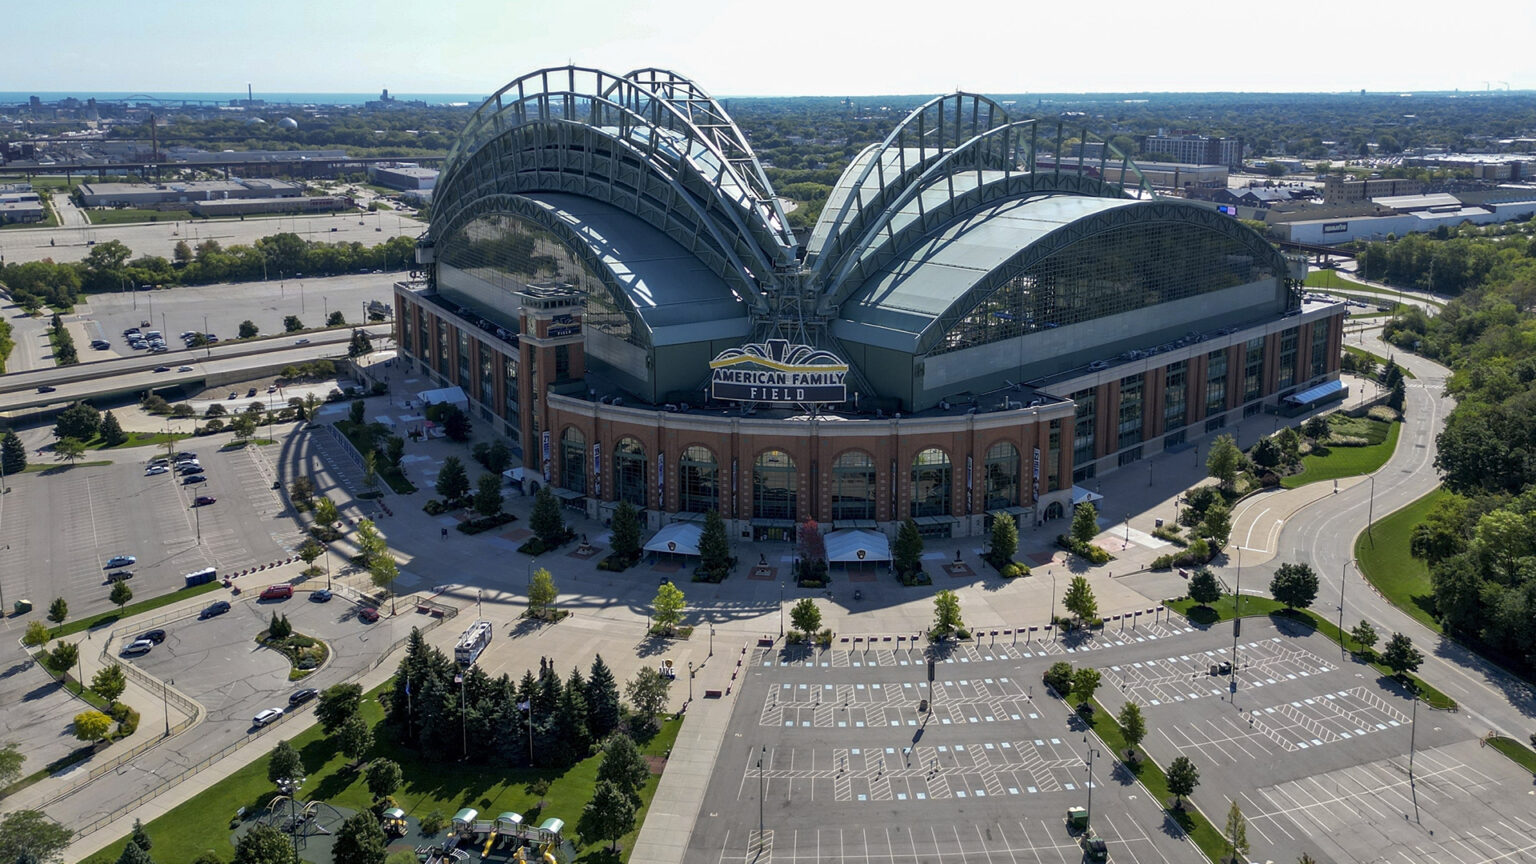 An aerial photo shows a baseball stadium with an open retractable roof and a sign over its home plate entrance reading American Family Field, surrounded by empty parking lots and roads, with an urban landscape of building and trees extending to the horizon.